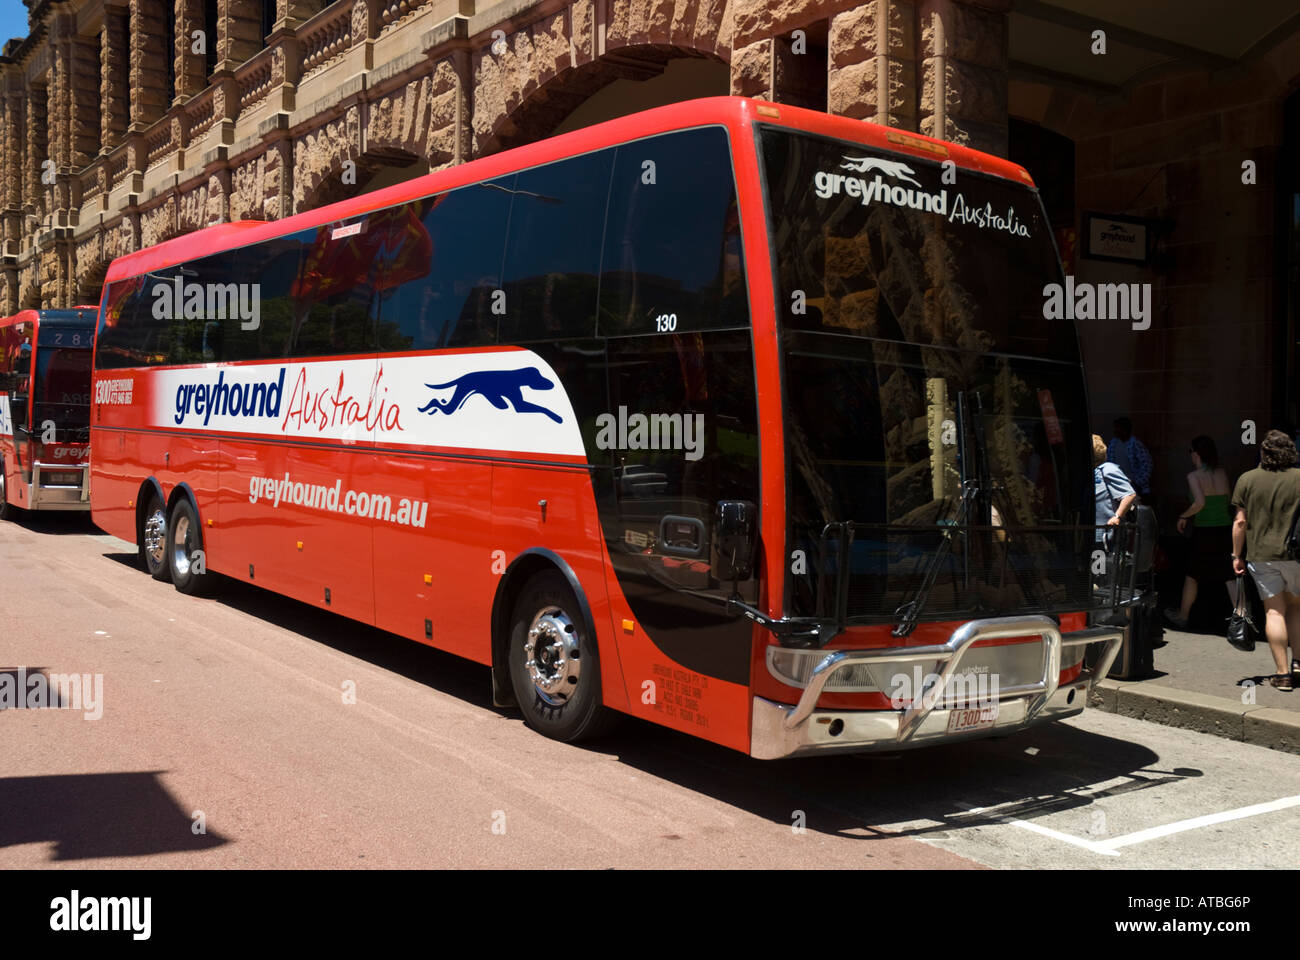 Modern red greyhound bus or coach at the terminus of its journey. Long distance coach or bus; public transport Australia; Australian transportation. Stock Photo